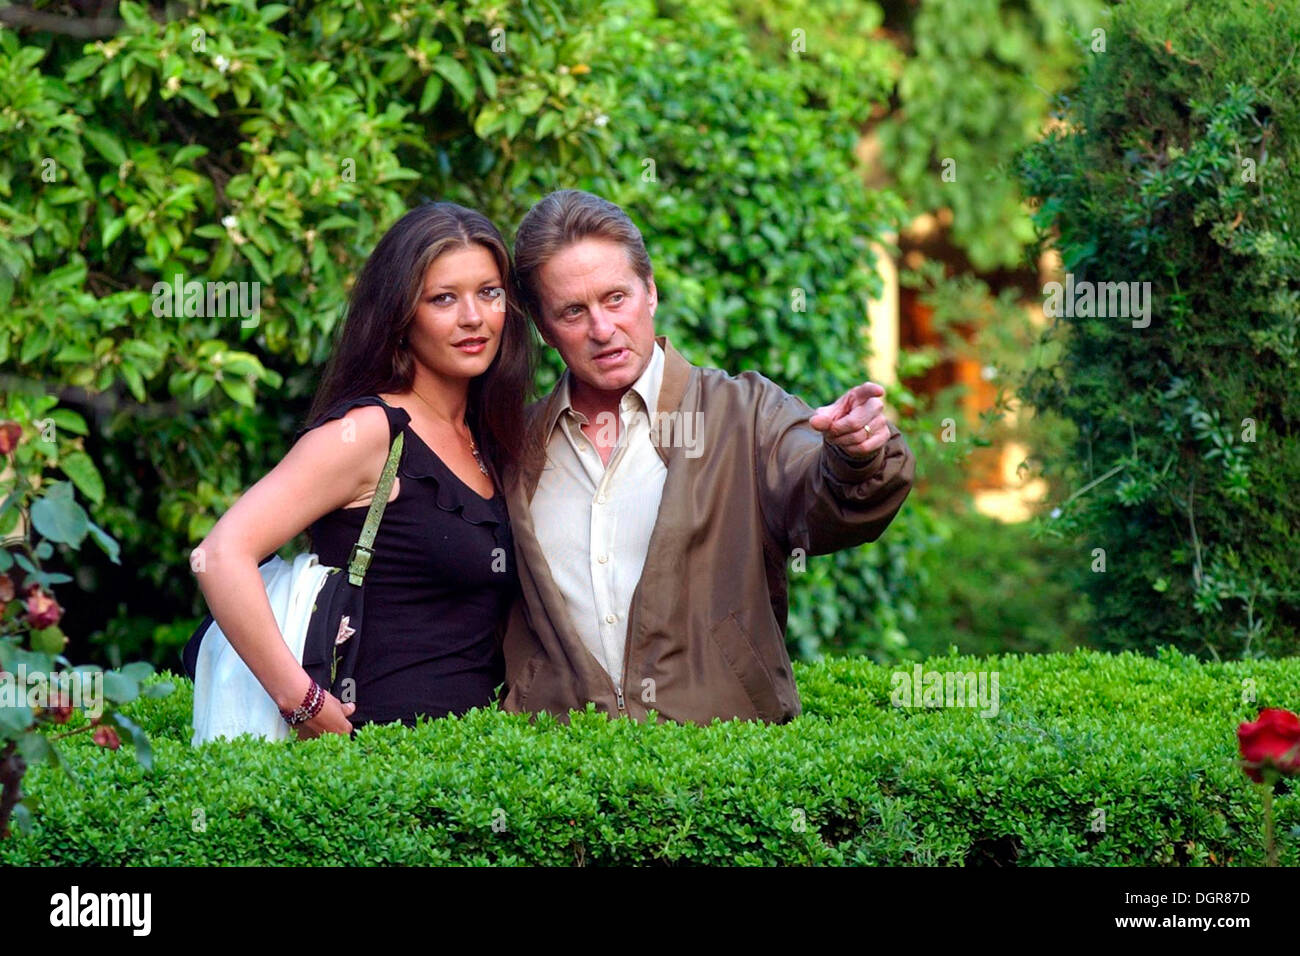 US actors Michael douglas and Catherine Zeta Jones are seen during an event in the Spanish island of Mallorca Stock Photo